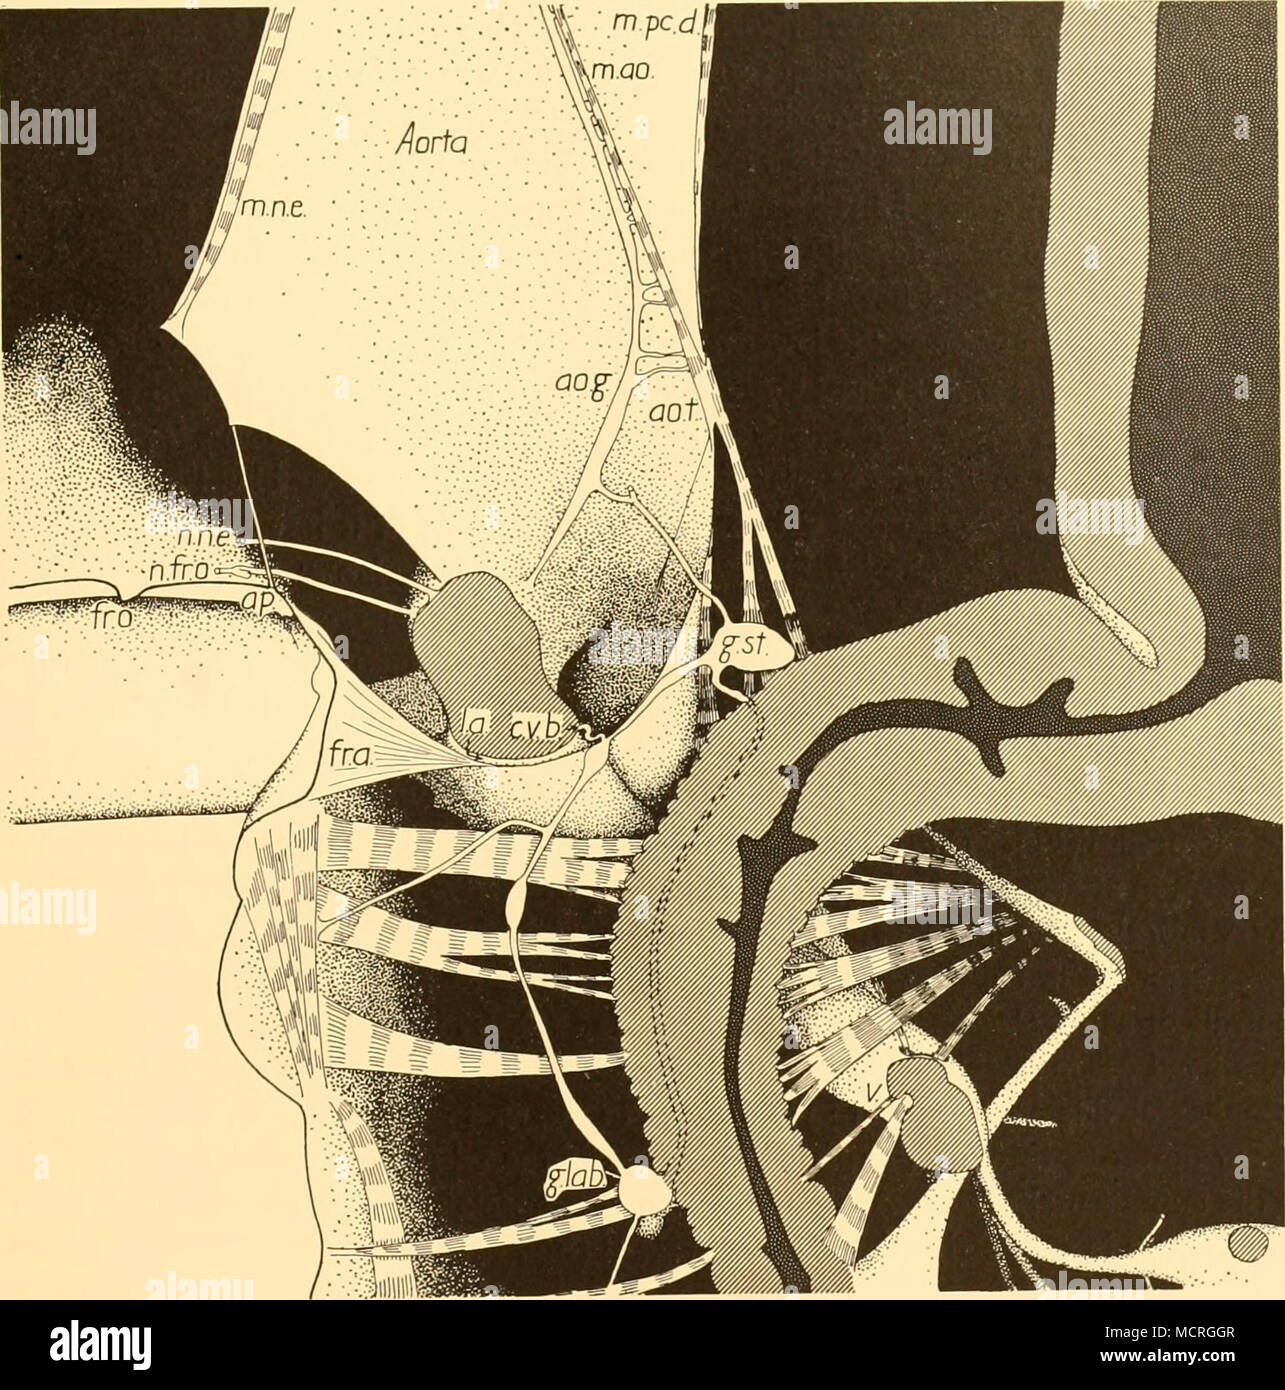 . Fig. 12. Same reconstruction as in Fig. 11 but from the sagittal plane showing aorta and nerve ring accurately bisected and complete visceral nervous system, ao.g. aortic ganglion; ao.t. aortic tendon; ap. apodeme supporting nauplius eye muscle; c.v.b. connexion between visceral system (labral loop) and brain;fr.a. frontal apodeme; fr.o. frontal organ; g.lab. labral ganglion; g.st. stomach ganglion; La. labral artery; m.ao. aortic muscle; m.n.e. nauplius eye muscle; m.pc.d. pericardial dilator; n.fr.o. nerve to frontal organ; n.n.e. nerve to median component of nauplius eye; v. valve in supr Stock Photo